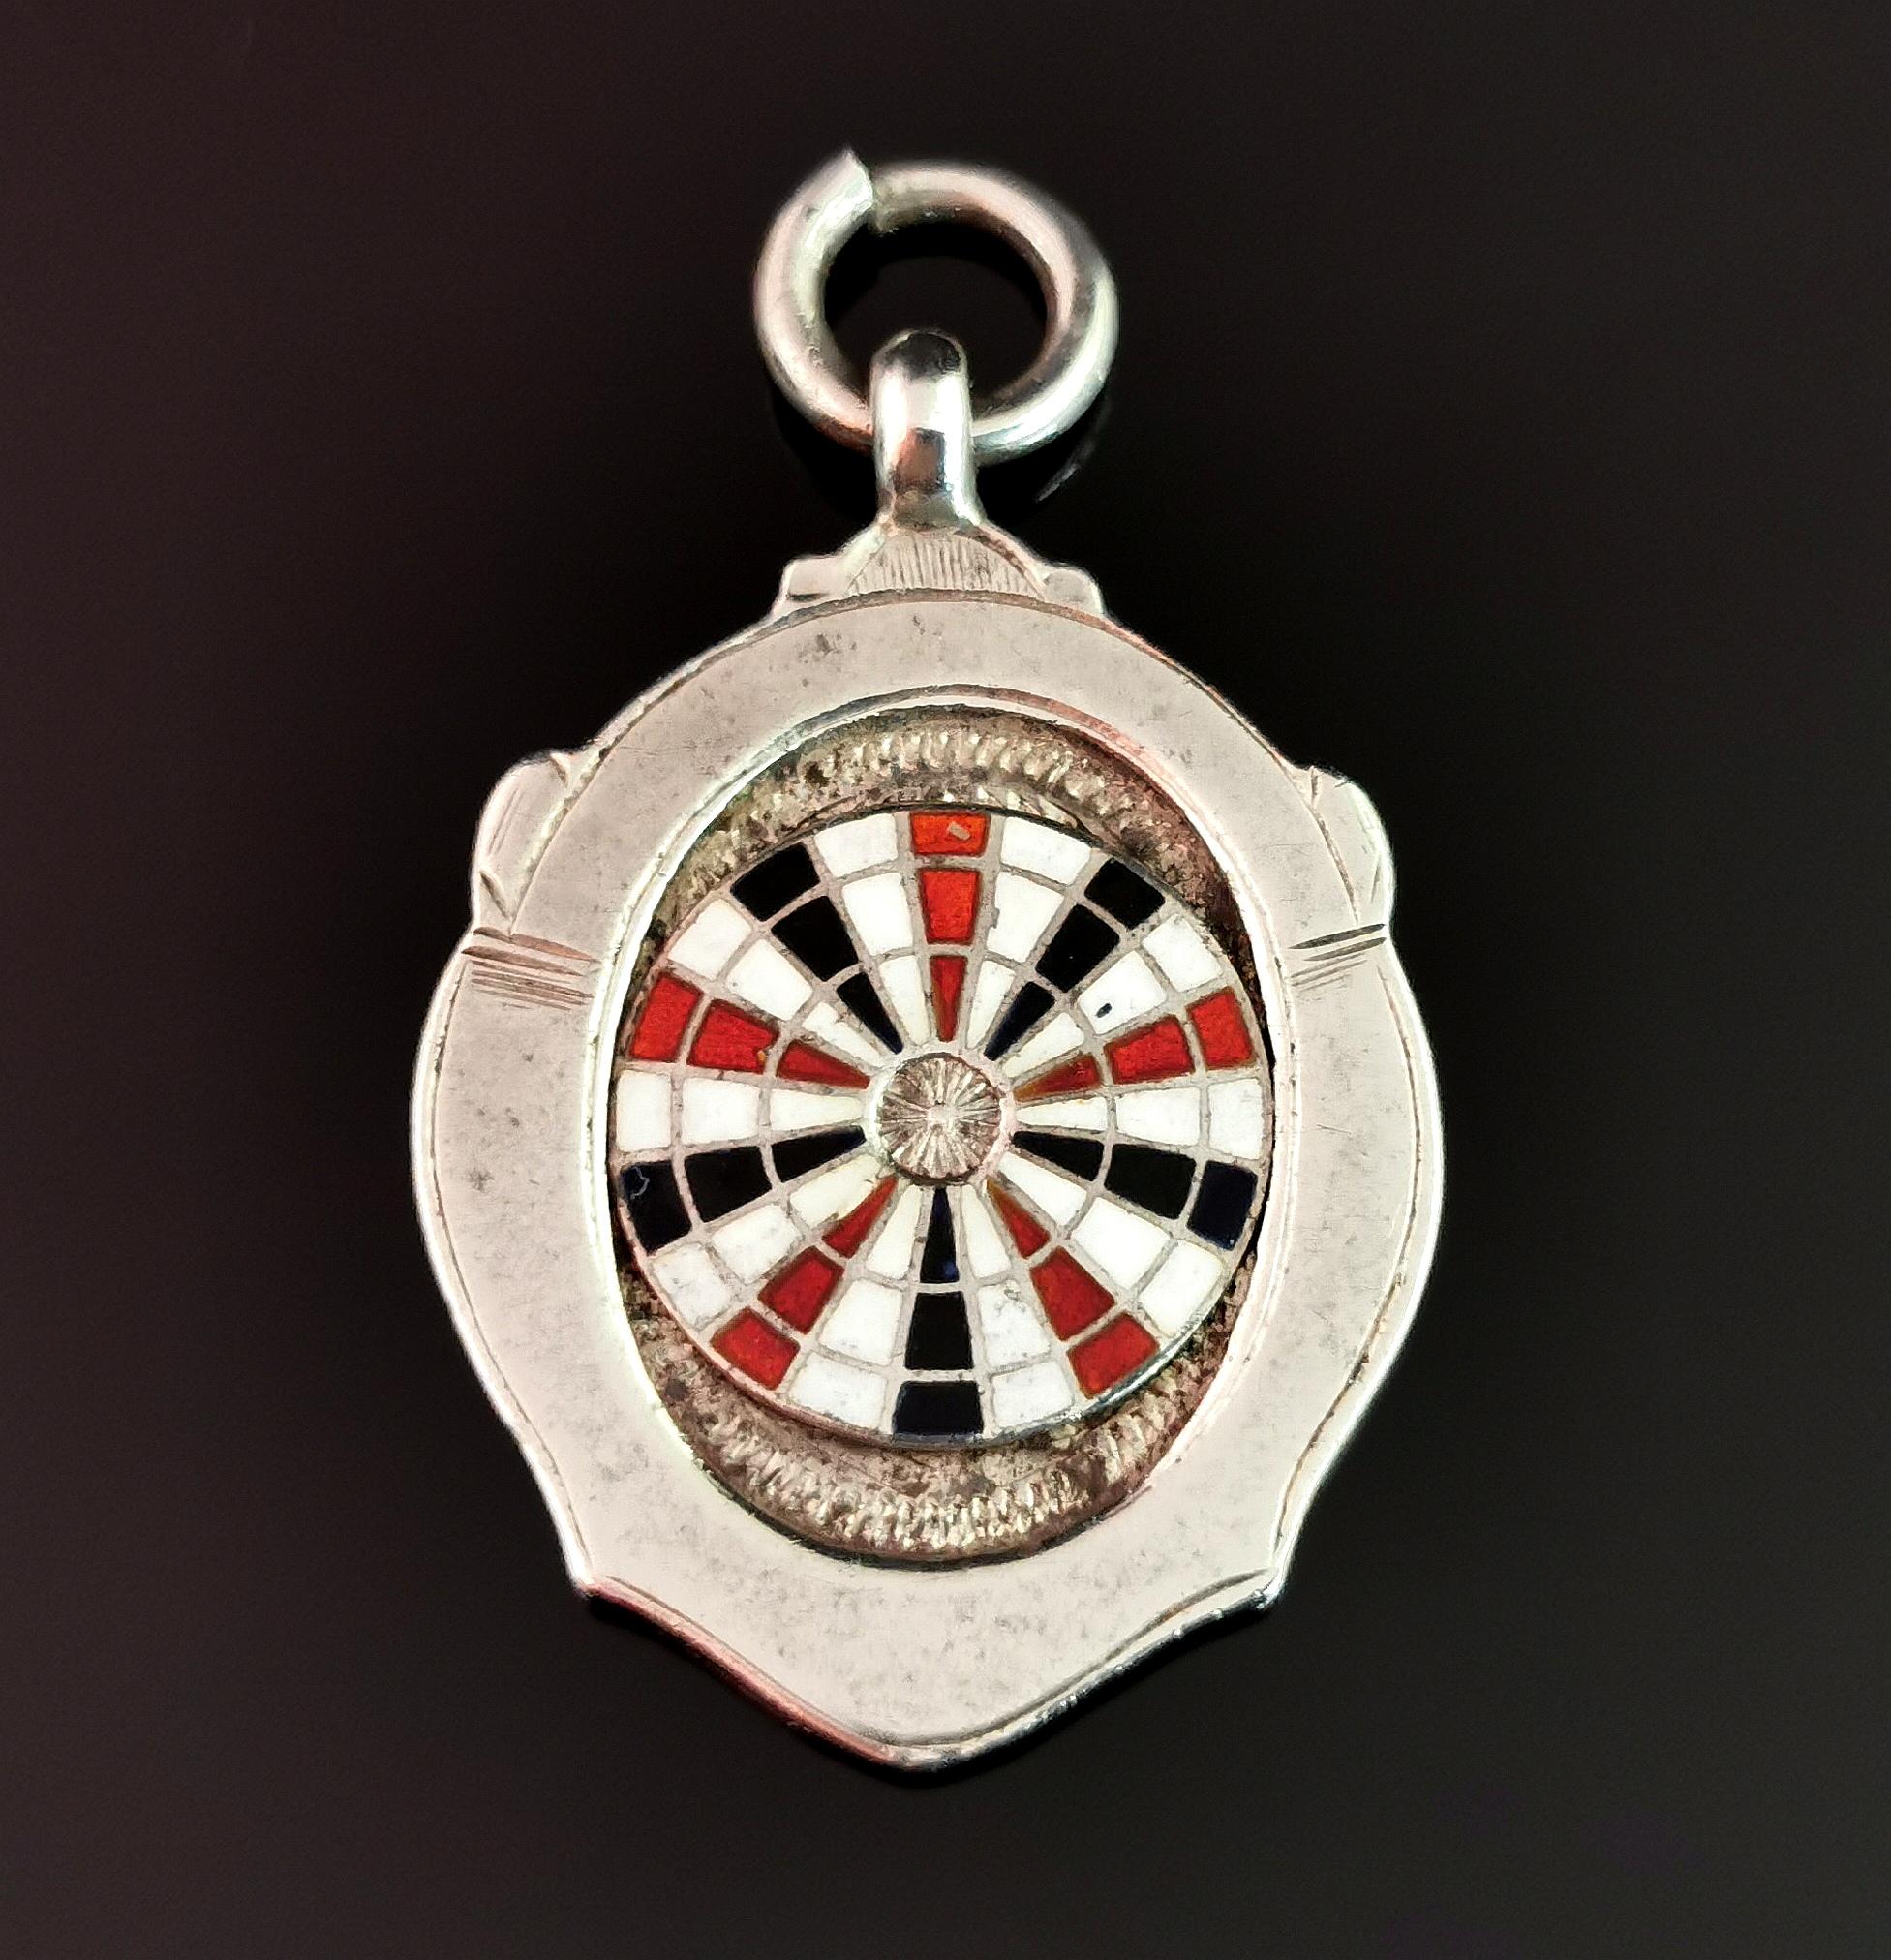 A fantastic vintage 1930's sterling silver and enamel watch fob.

This fob features an enamelled dart board with red, white and blue sections.

An unusual and very well detailed watch fob, these also look great worn as pendants and this one really